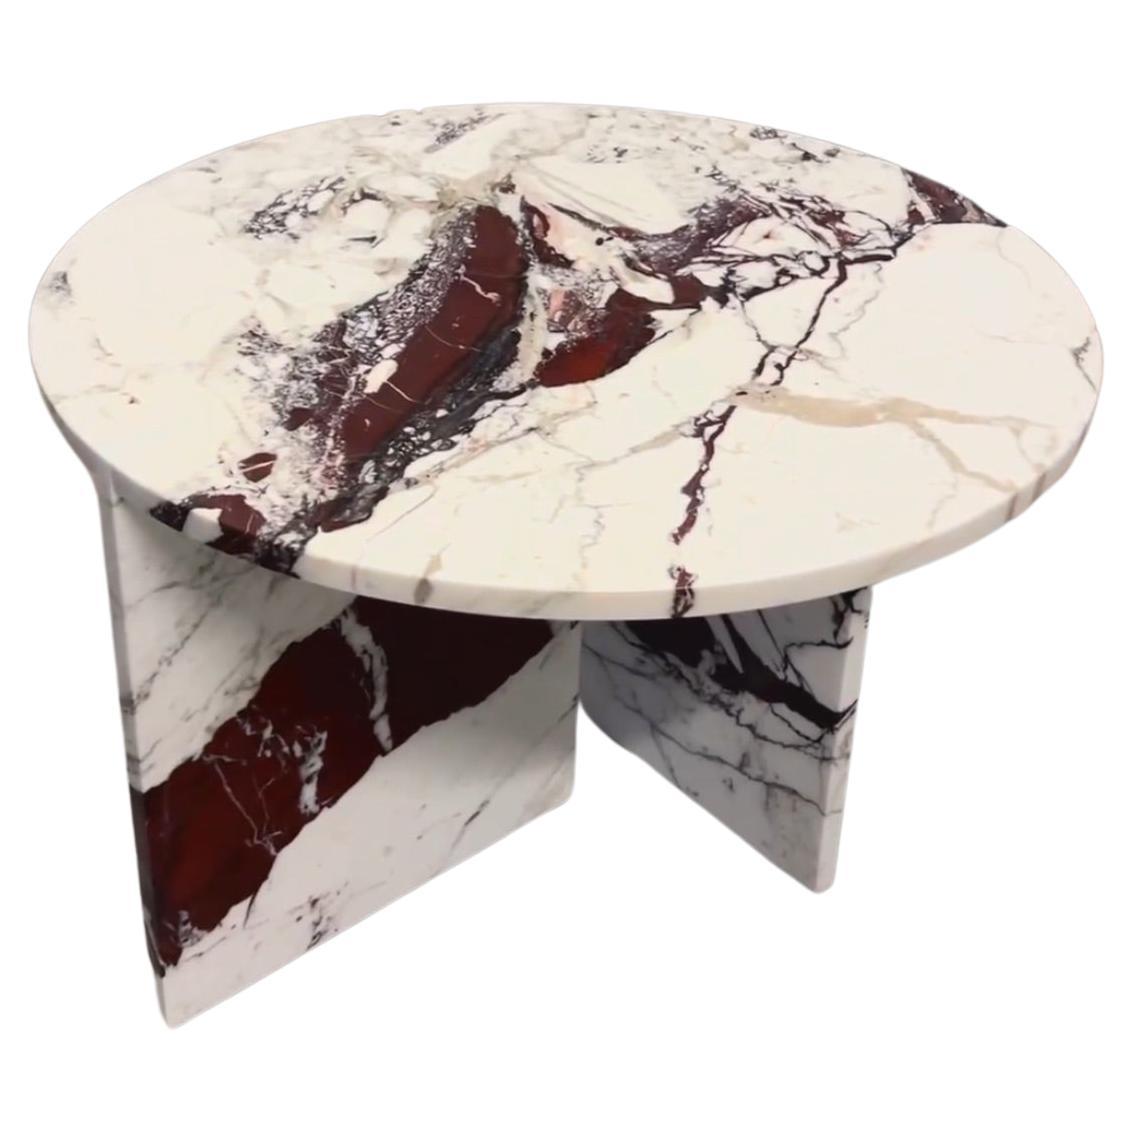 Tuscany Calacatta Violet Marble Round Coffee Table, Made in Italy